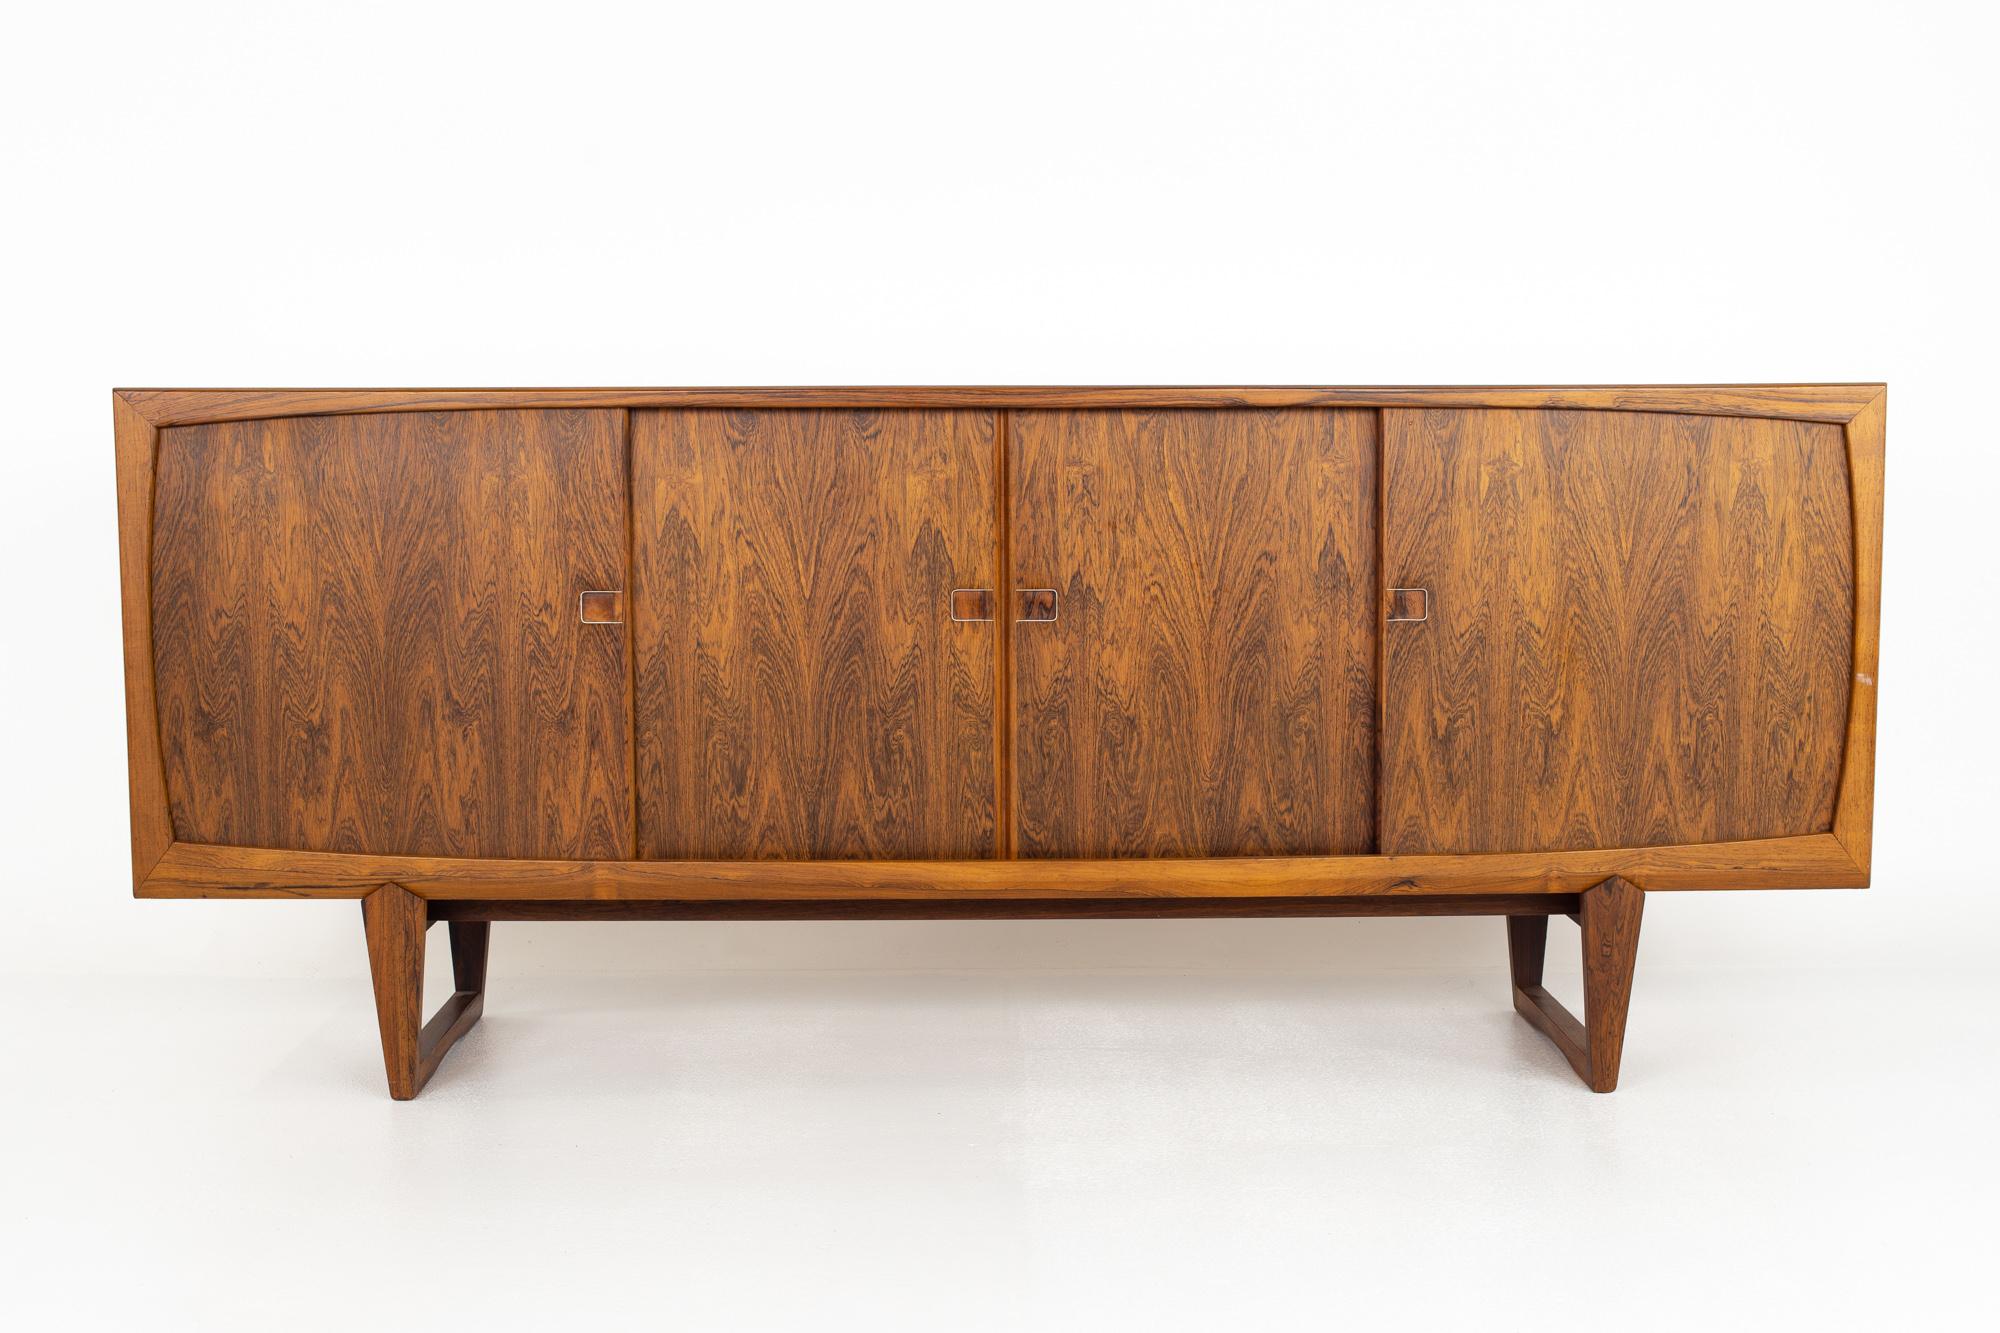 Hornslet Danish mid century rosewood sleigh leg credenza

Credenza measures: 82.5 wide x 19.5 deep x 34 inches high

?All pieces of furniture can be had in what we call restored vintage condition. That means the piece is restored upon purchase